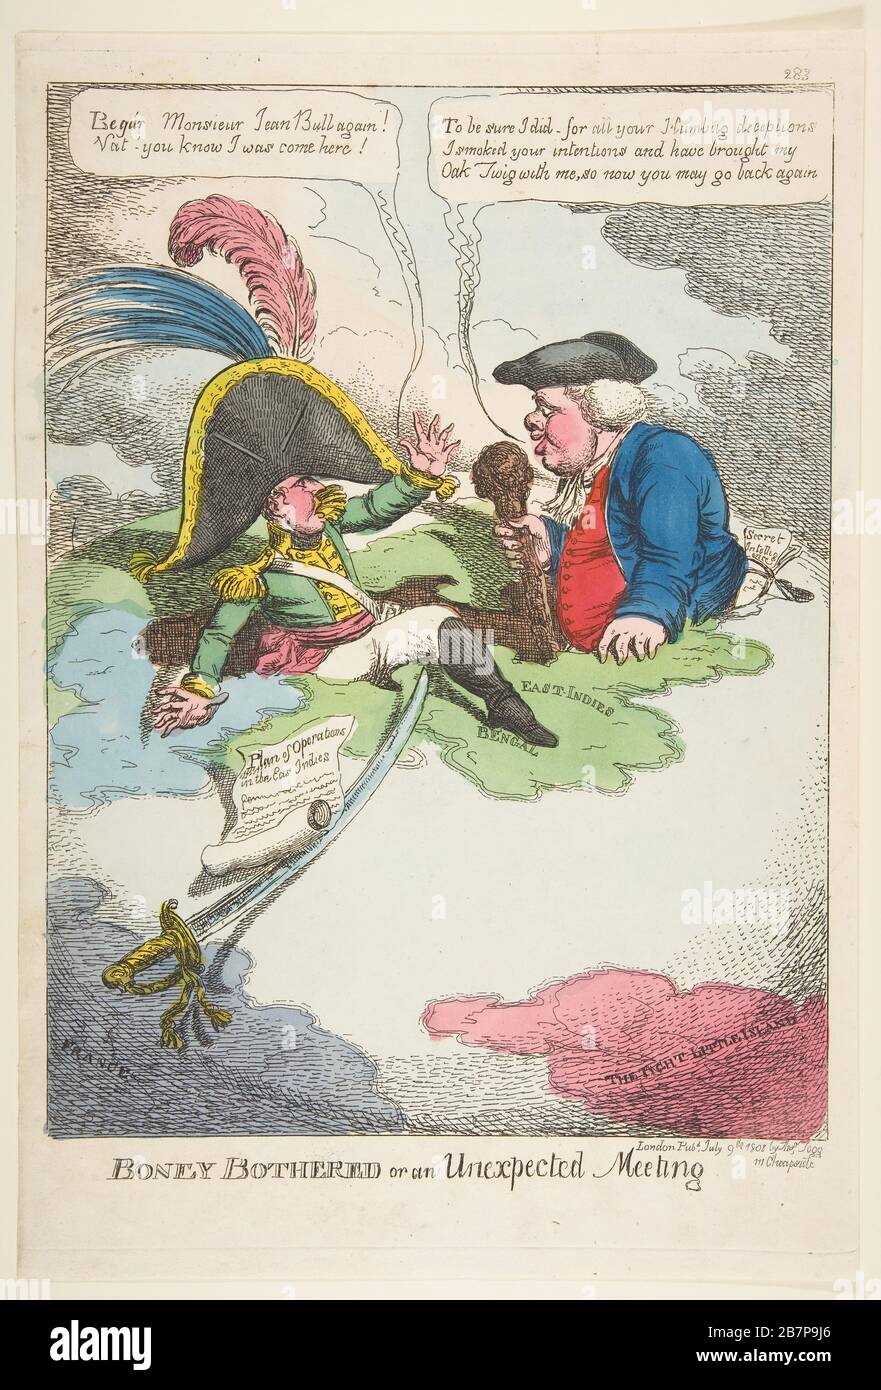 Boney Bothered or an Unexpected Meeting, July 9, 1808. Stock Photo